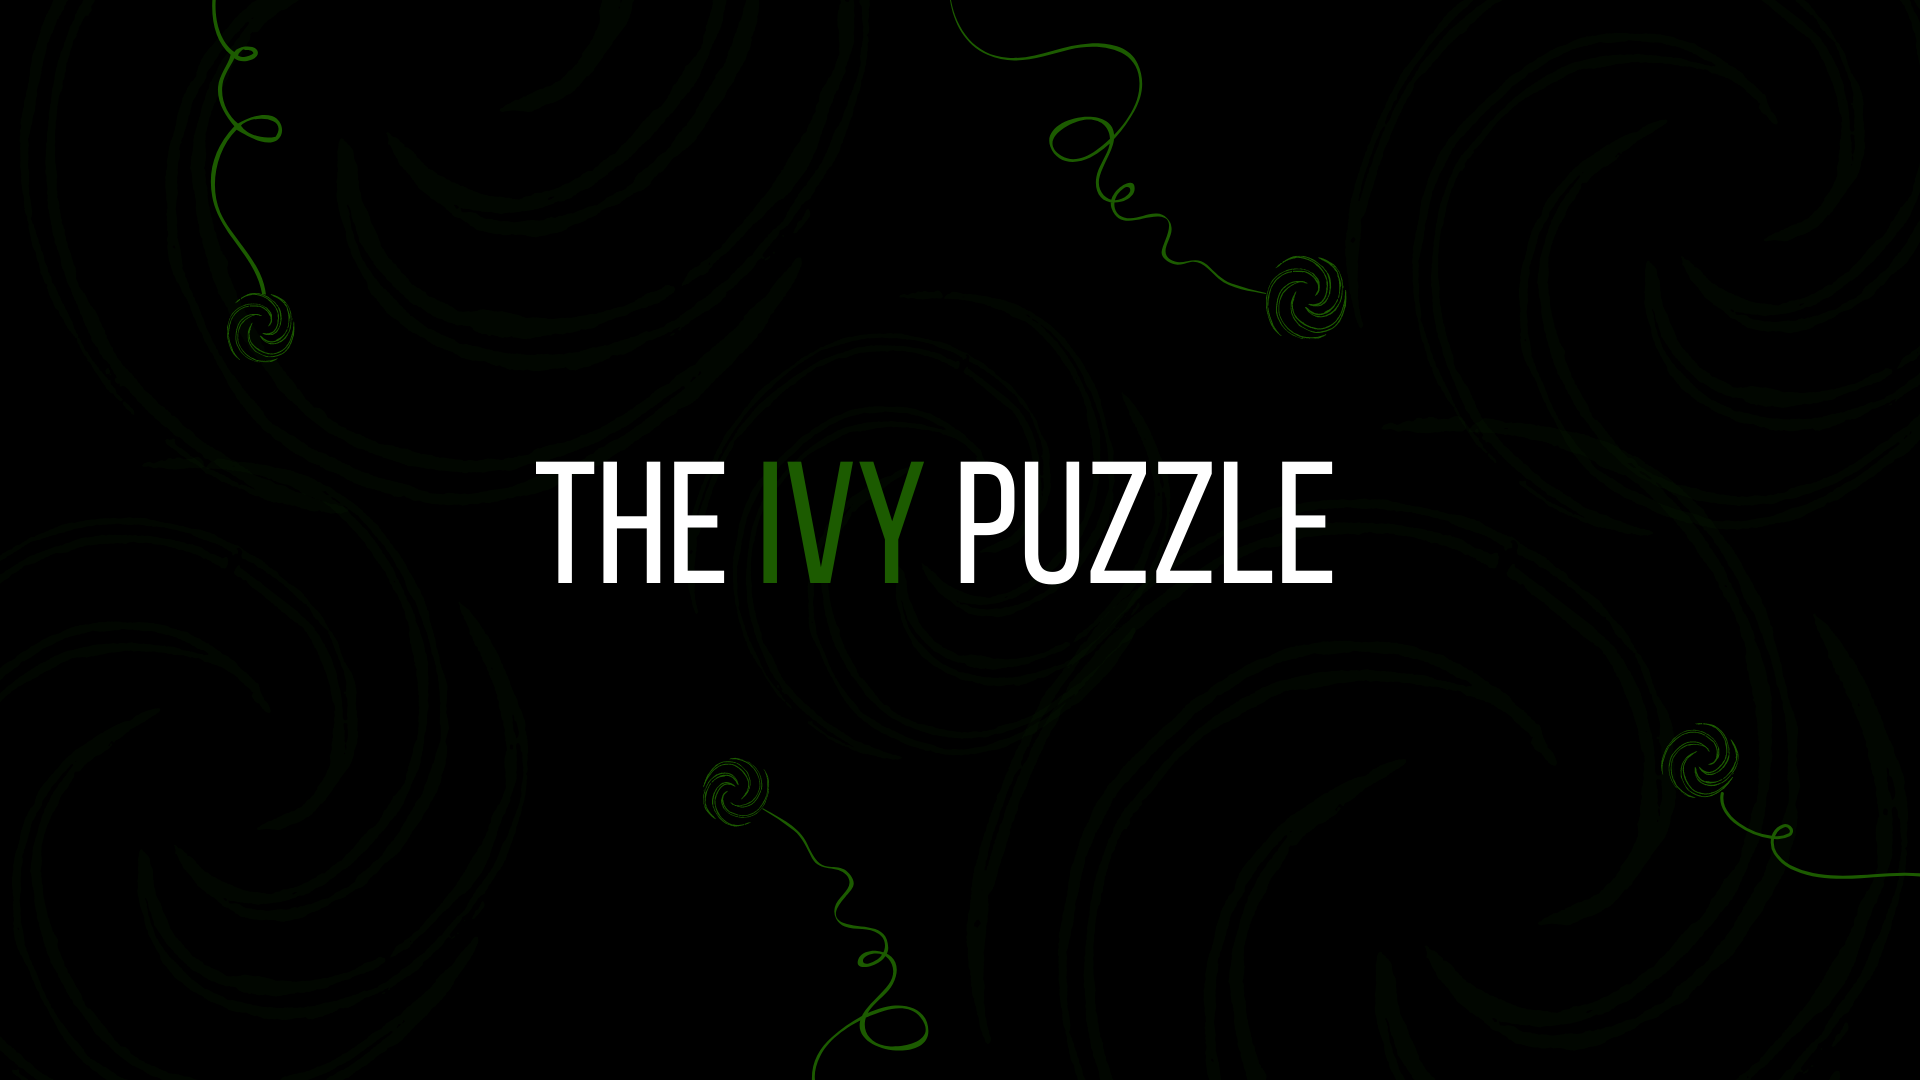 The Ivy Puzzle